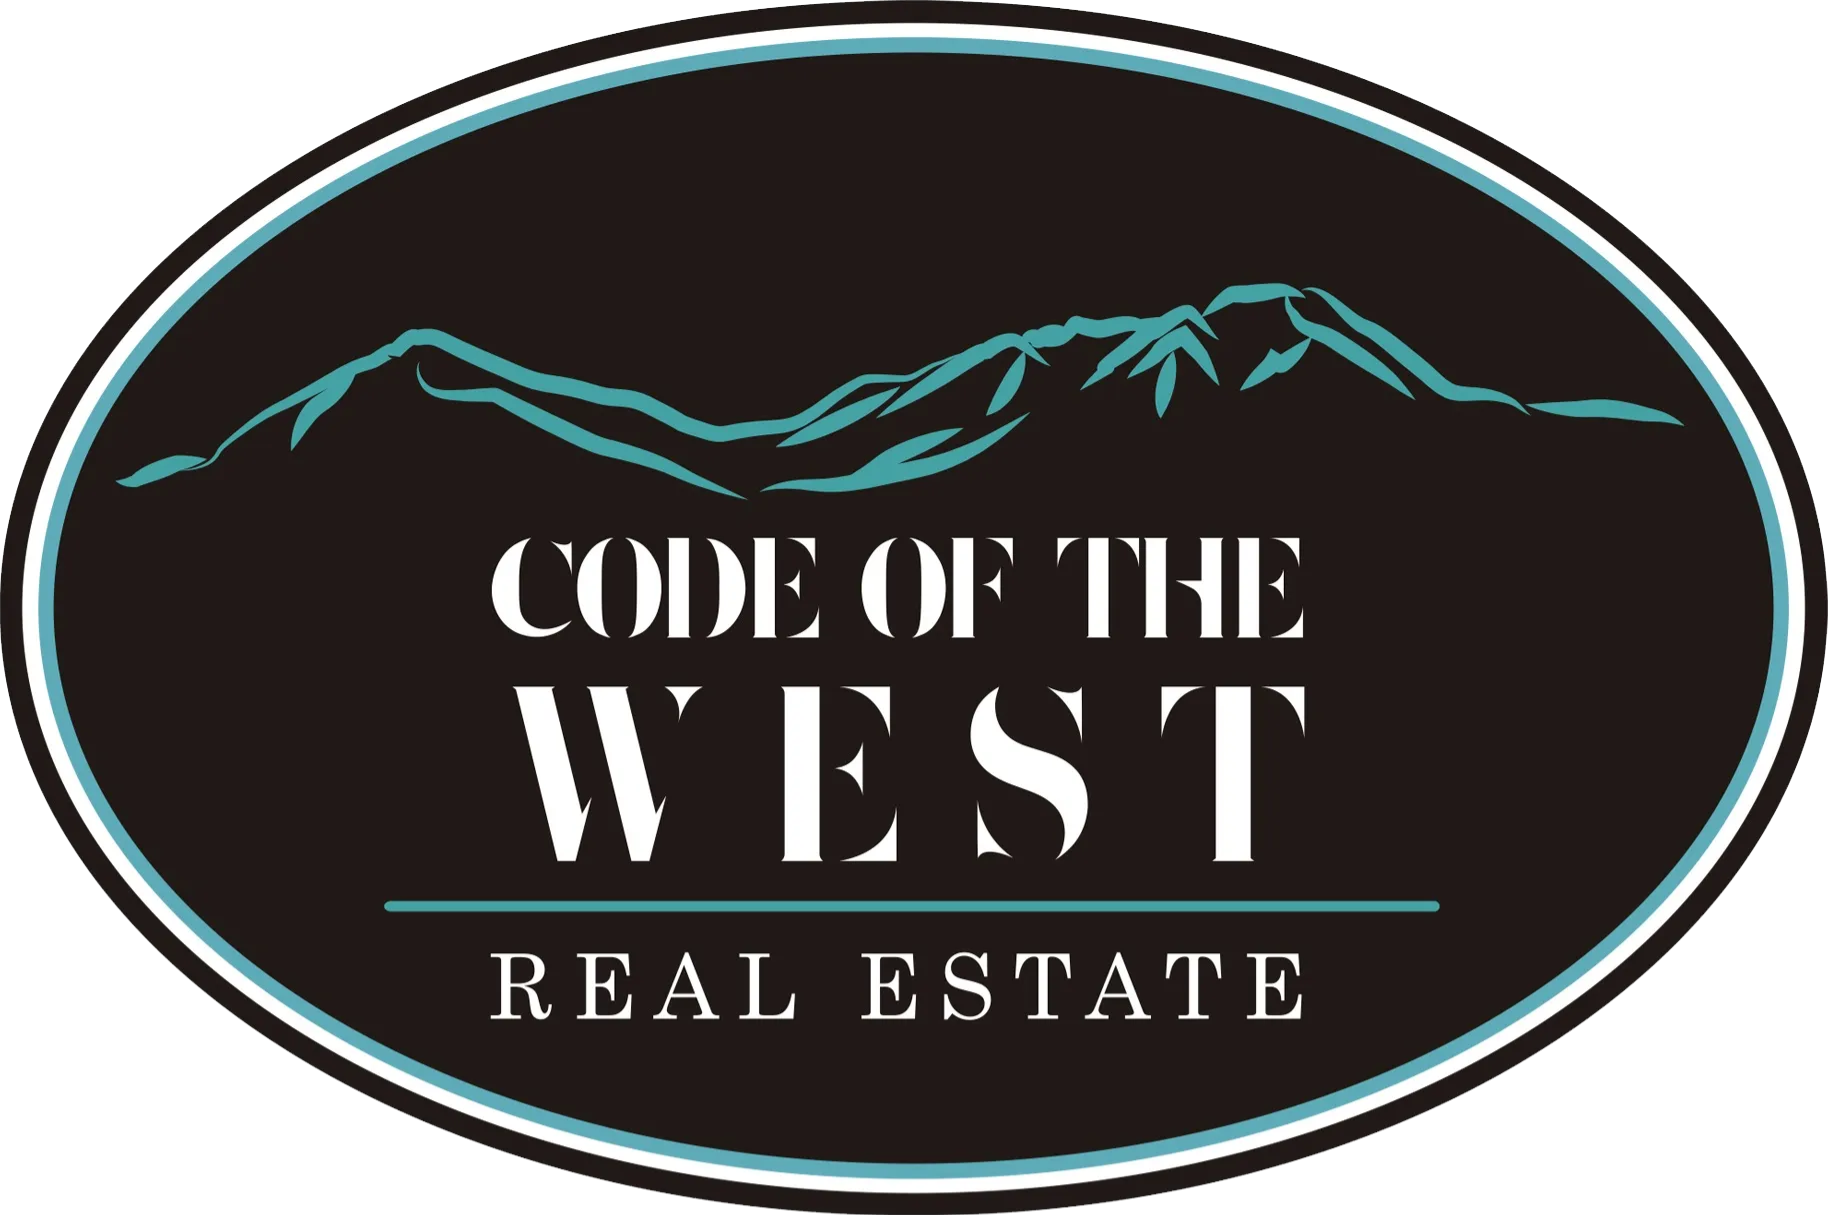 Code of the West Real Estate logo